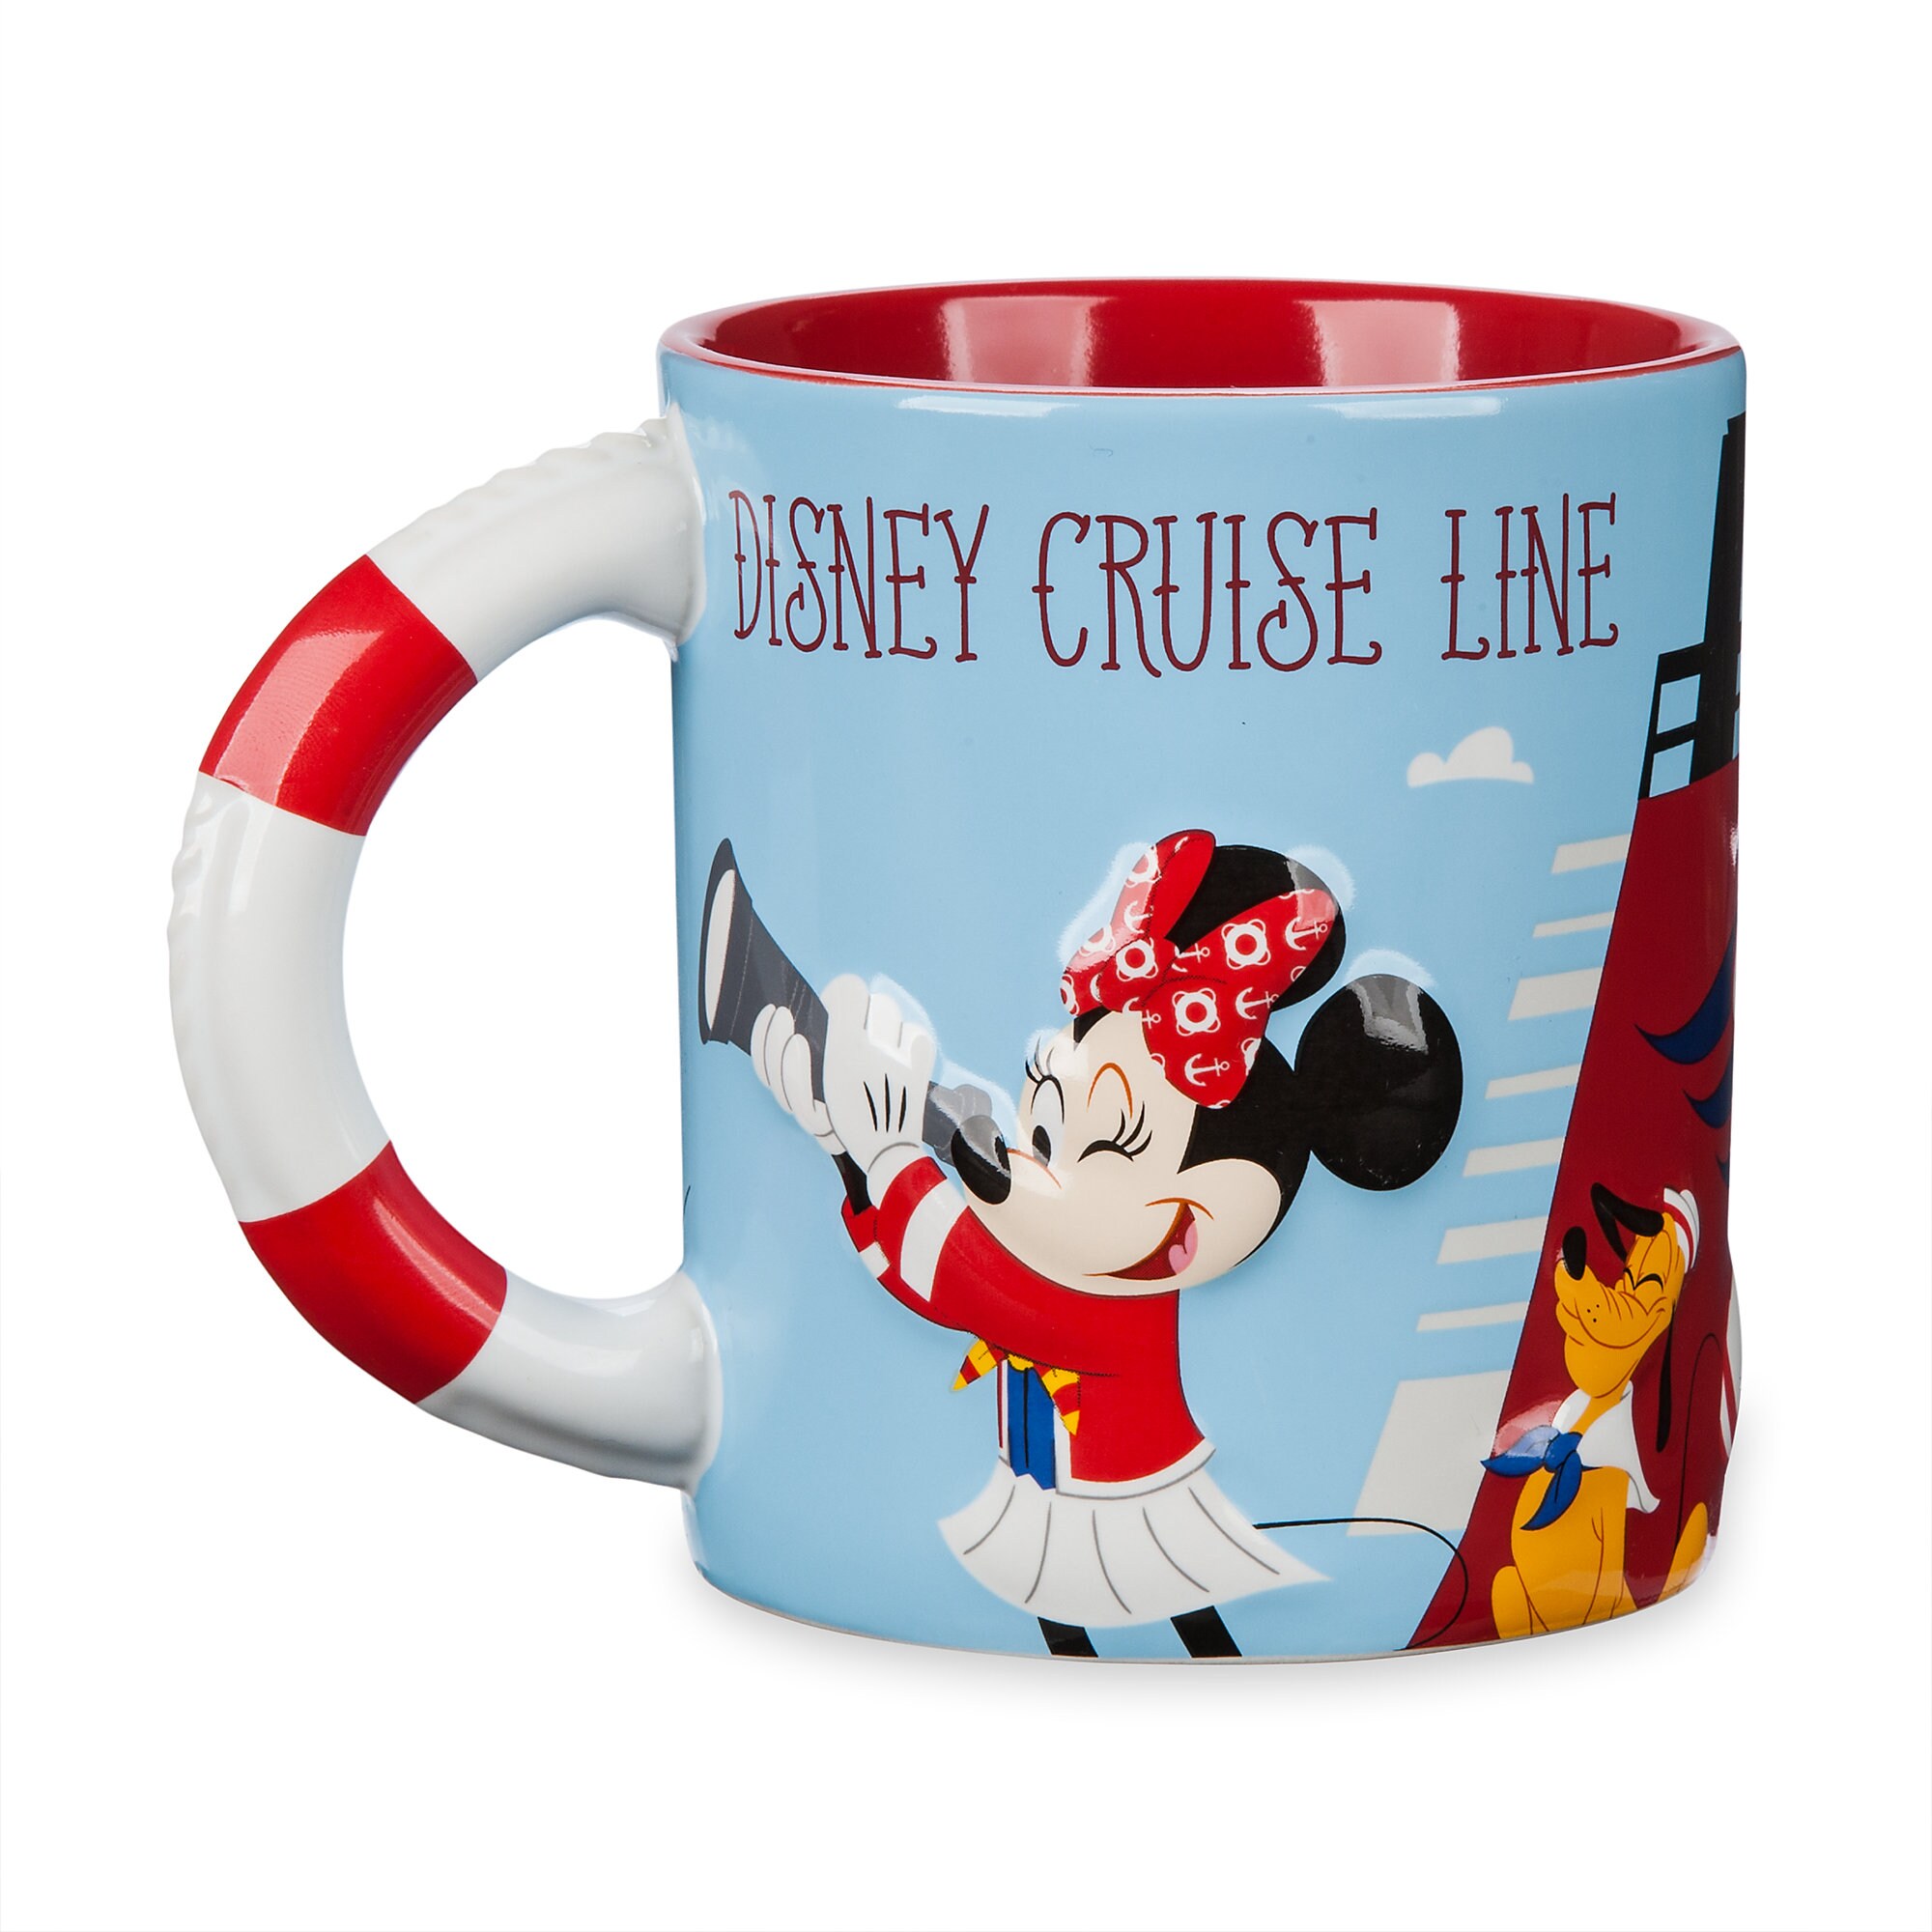 Mickey Mouse and Friends Mug - Disney Cruise Line